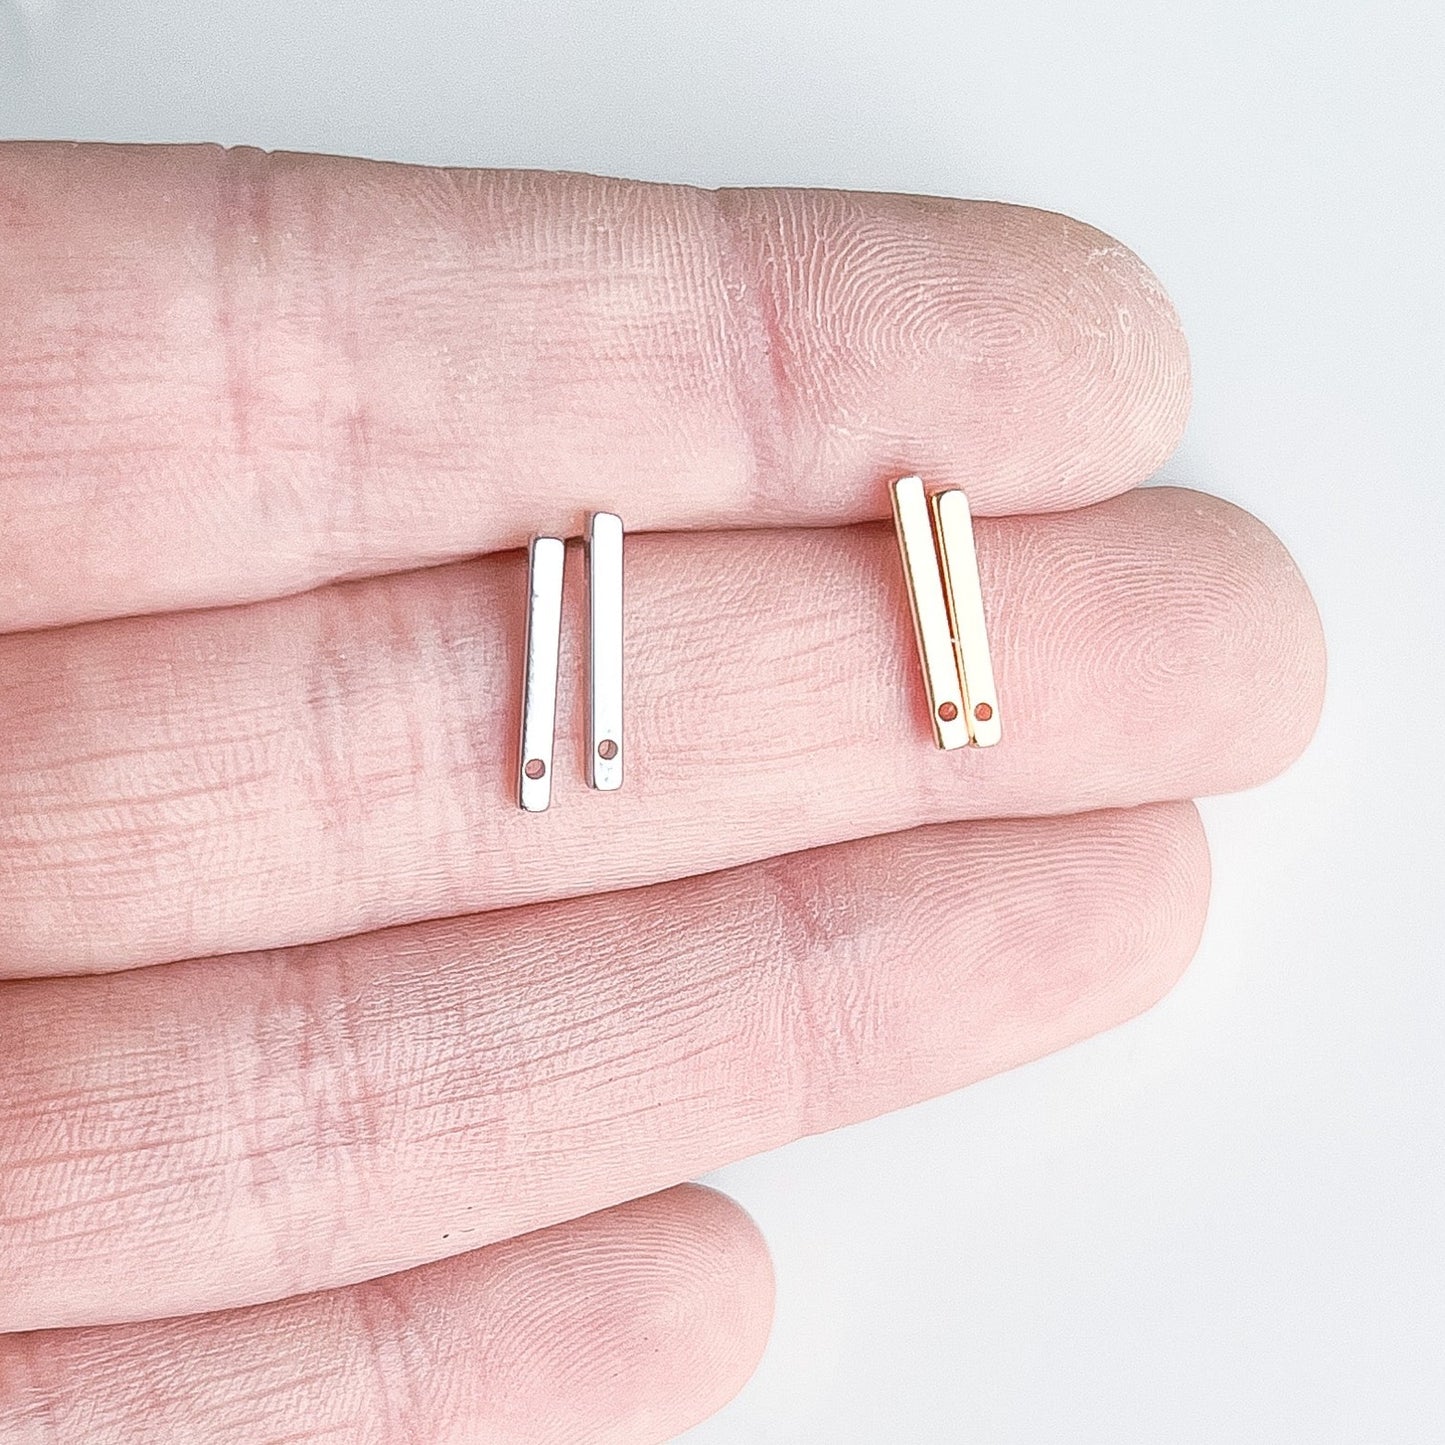 18k HQ Straight Bar Stud Finding - 10 PIECES - March Launch